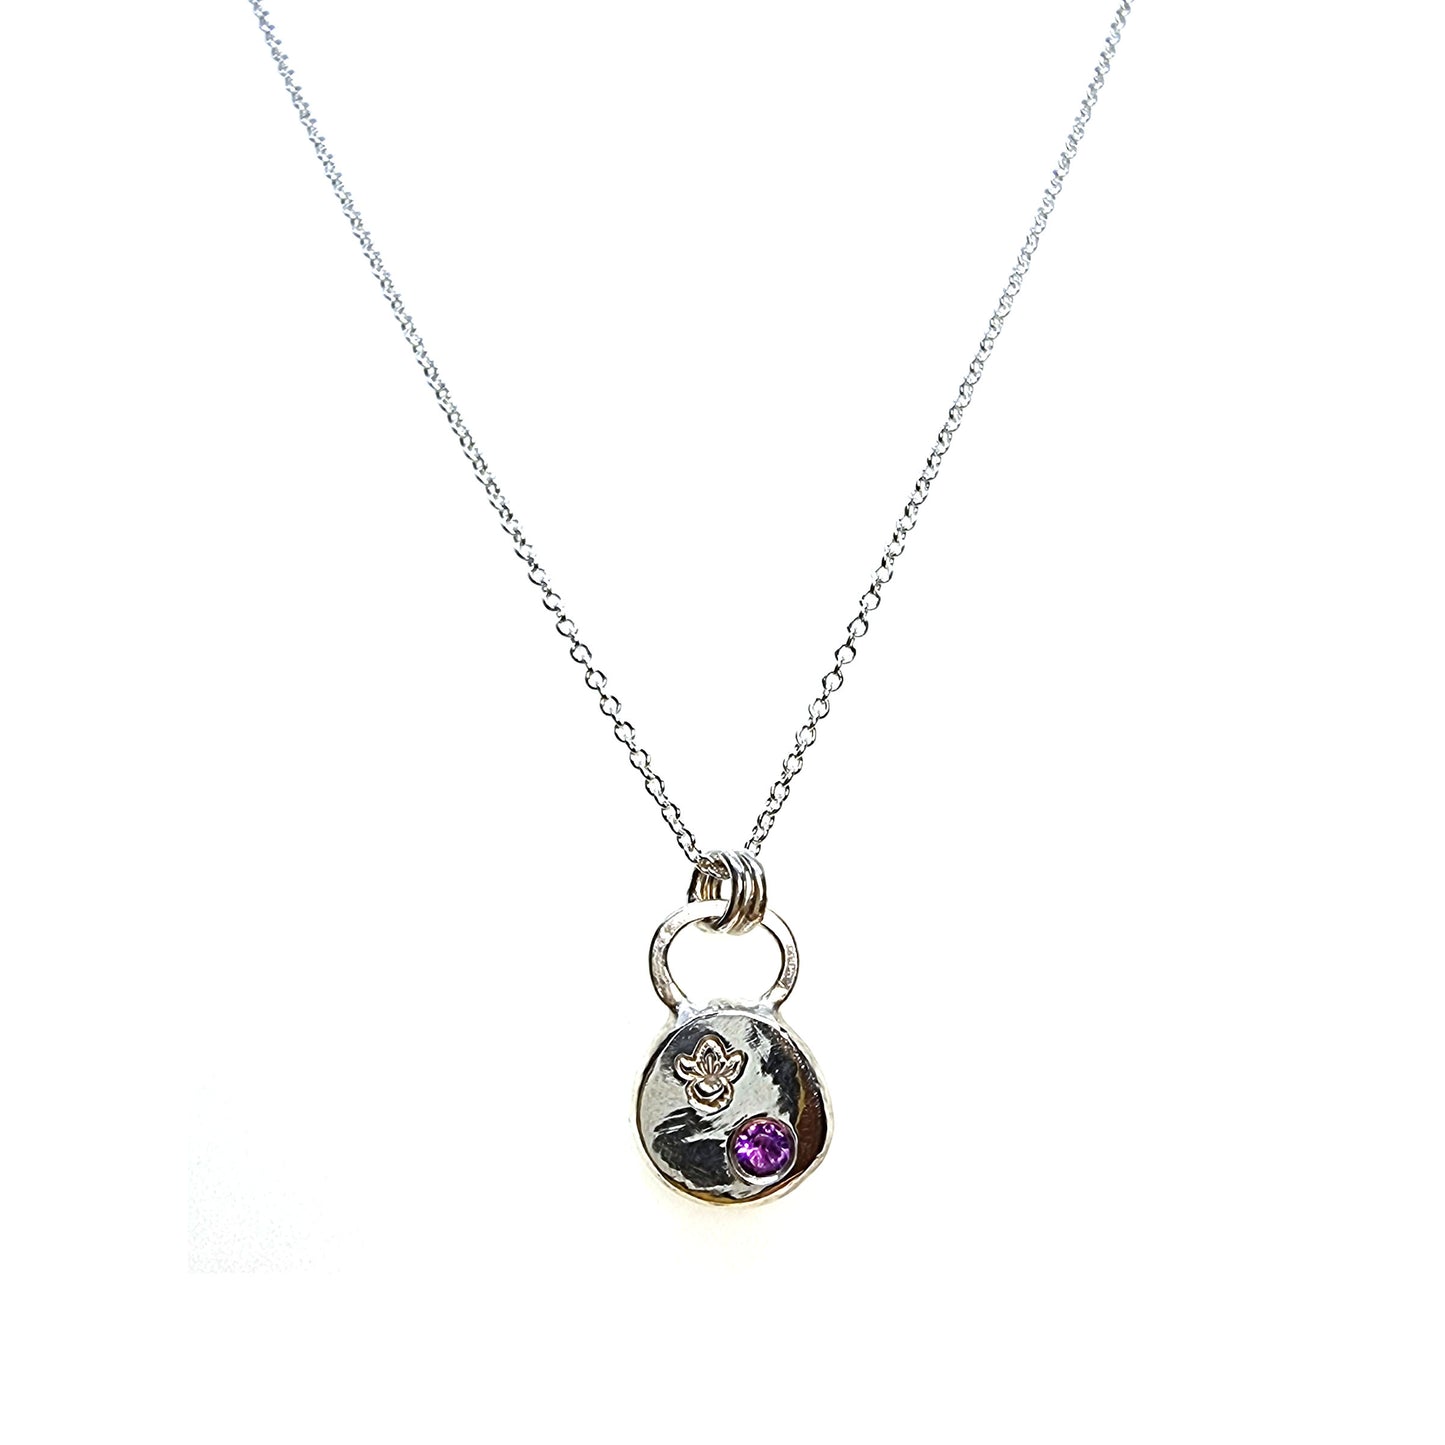 A round silver pendant with a violet flower (February birth flower) engraved on it and a round purple amethyst (February birthstone) flush set into it. On a silver chain.